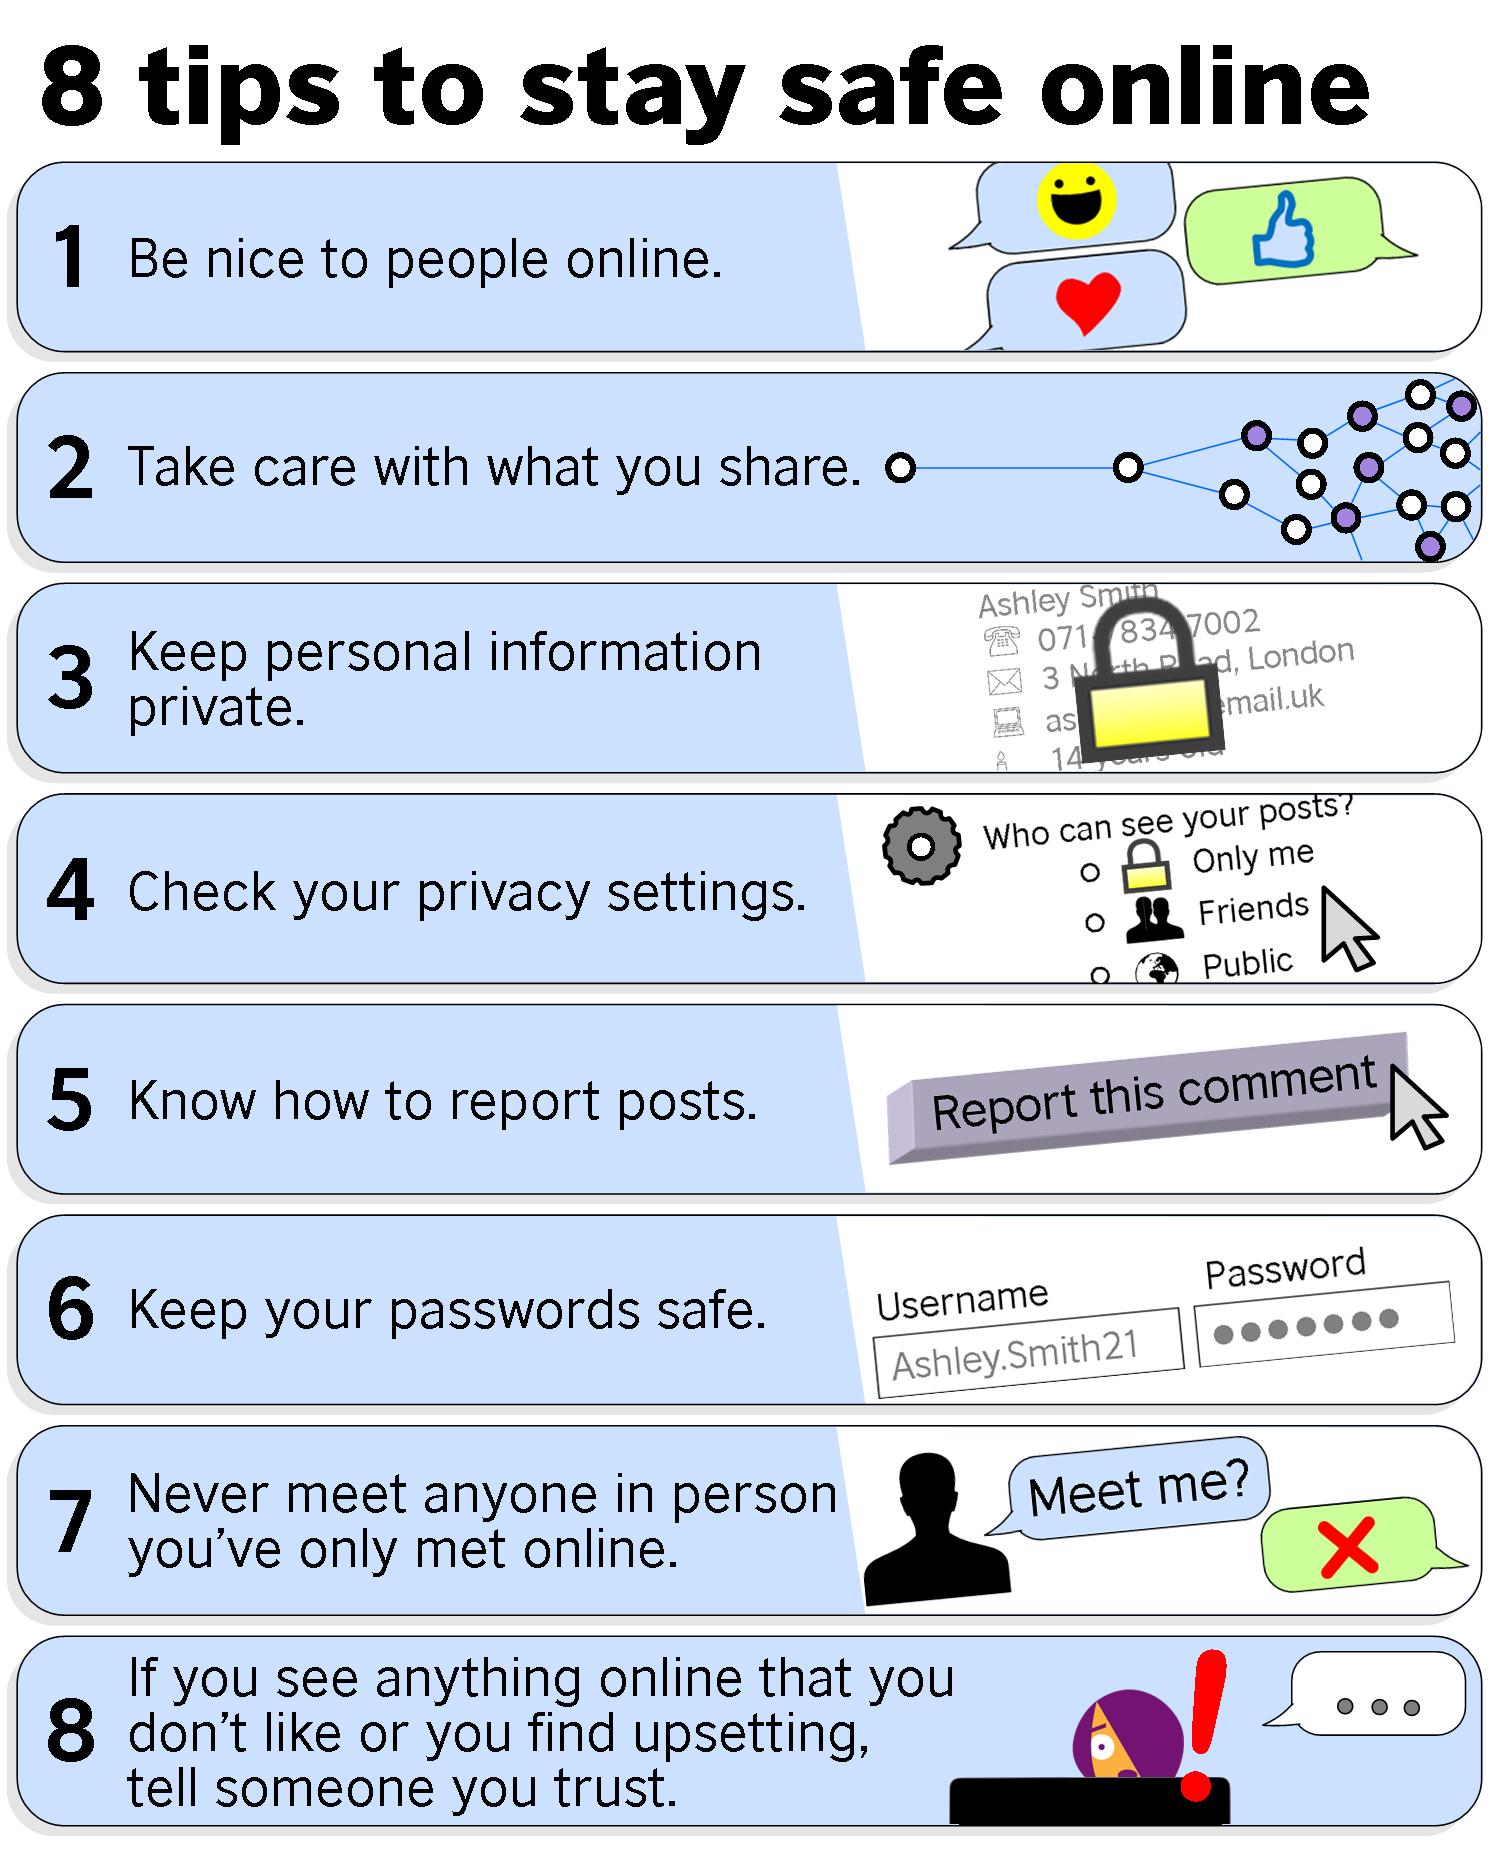 Online safety poster | LearnEnglish Teens - British Council